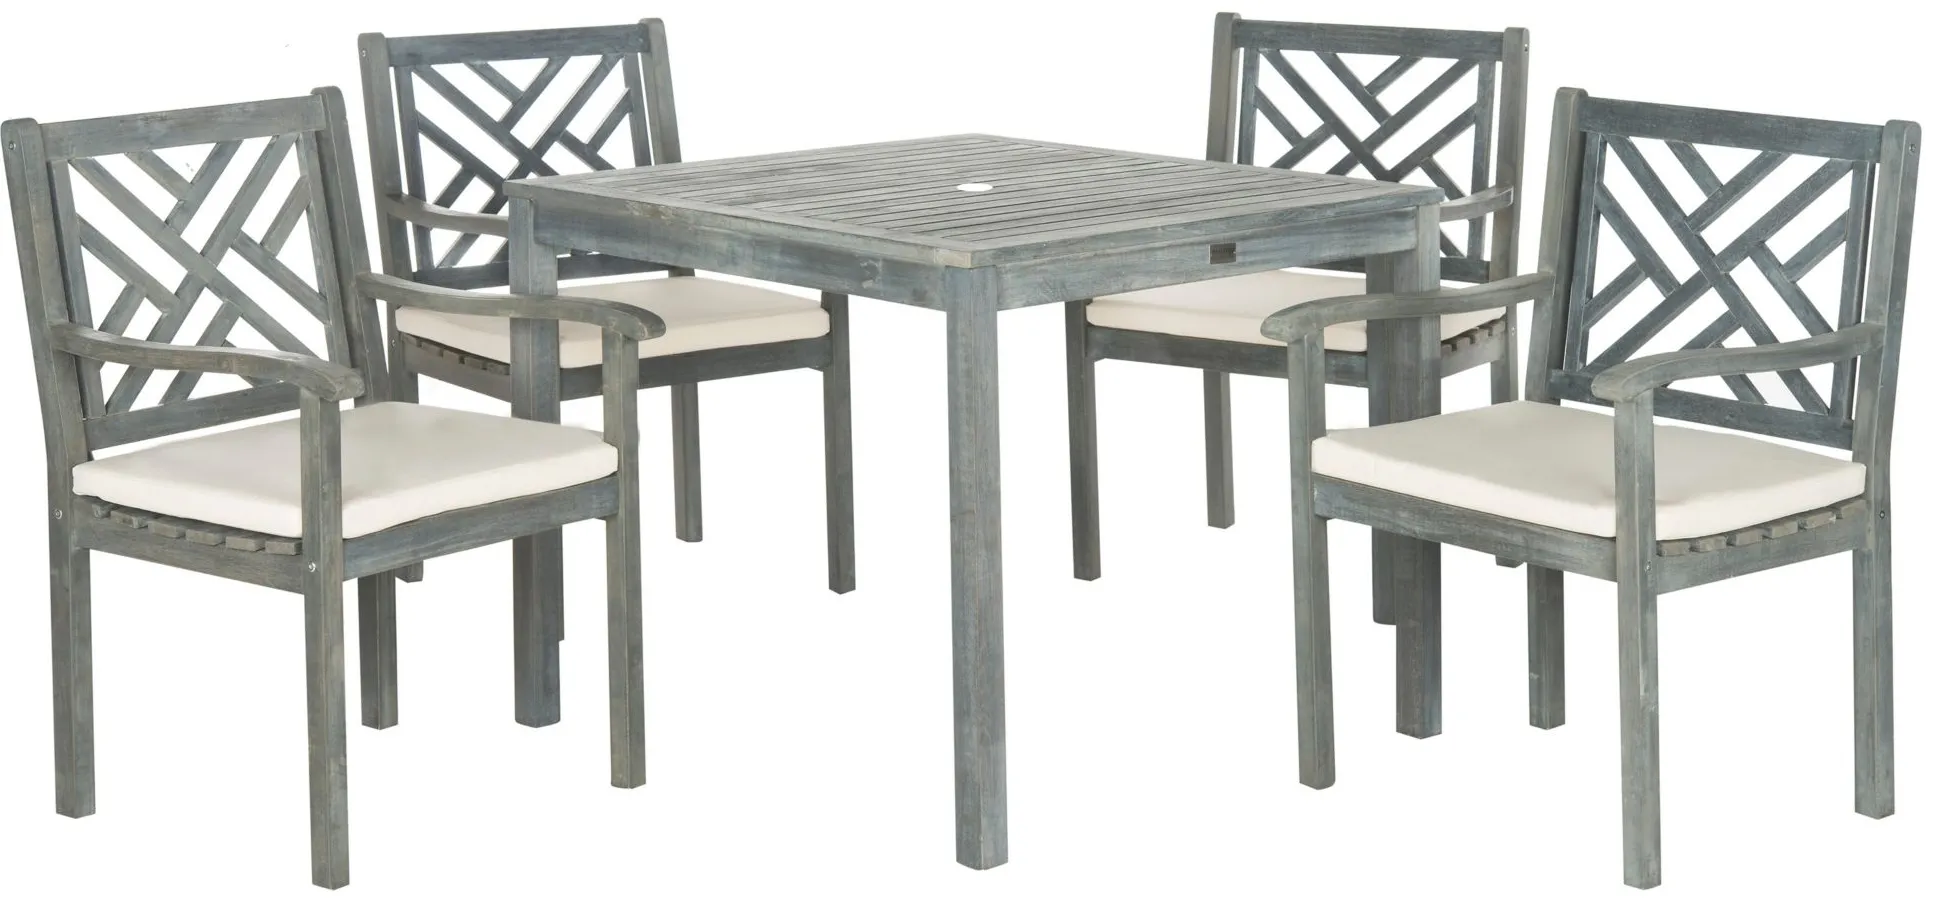 Kaylee 5-pc. Outdoor Dining Set in Ash Gray / Beige by Safavieh